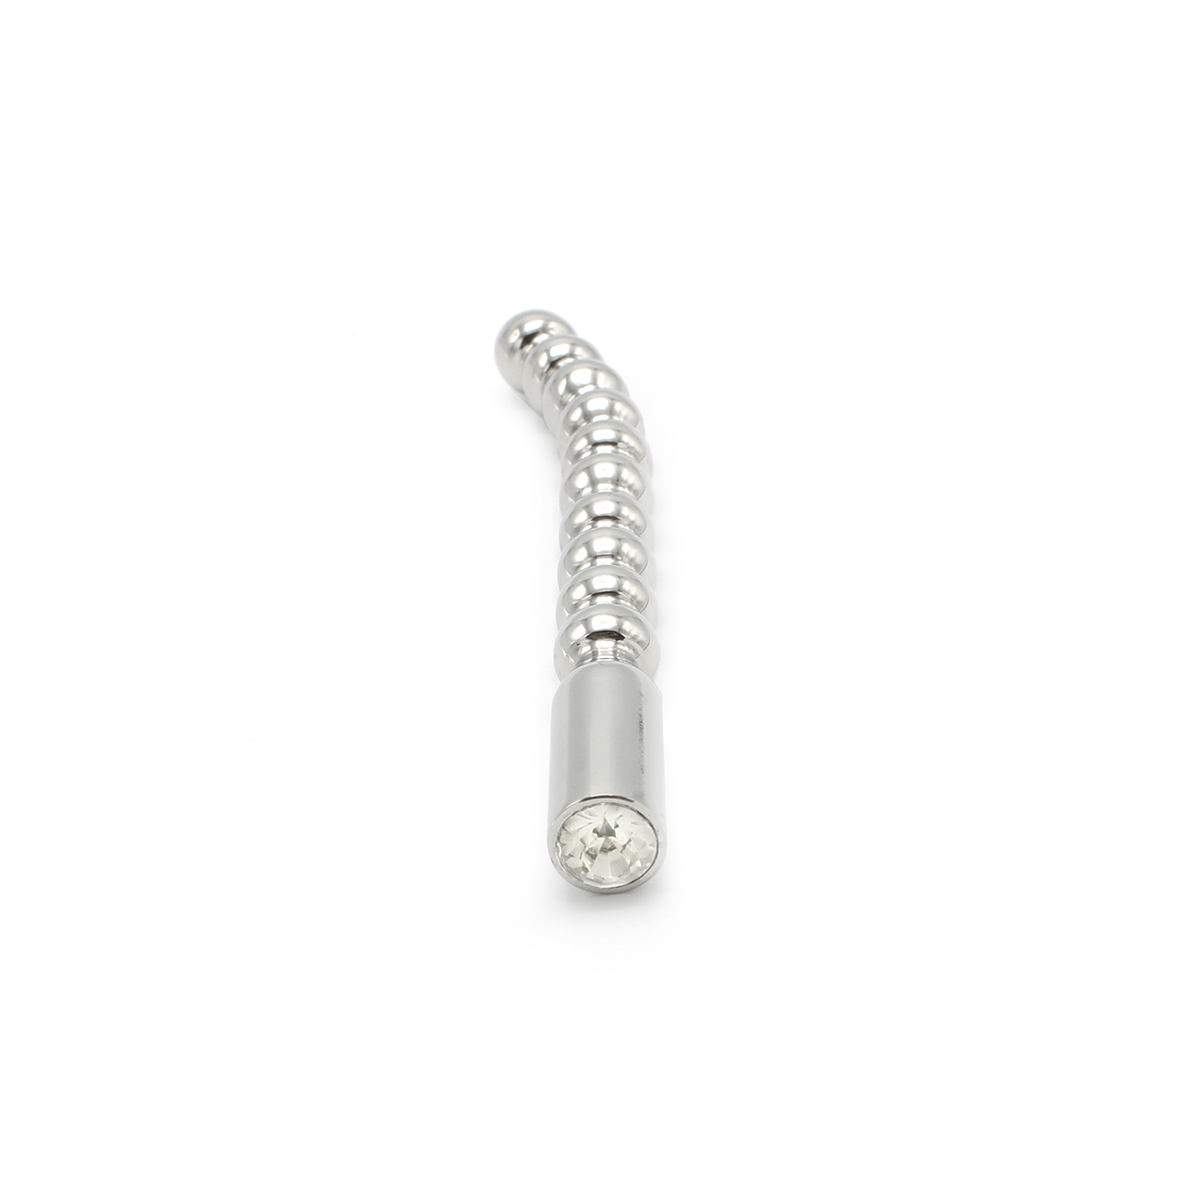 Solid-Penis-Plug-Beaded-Curved-10-mm-OPR-2960101-4